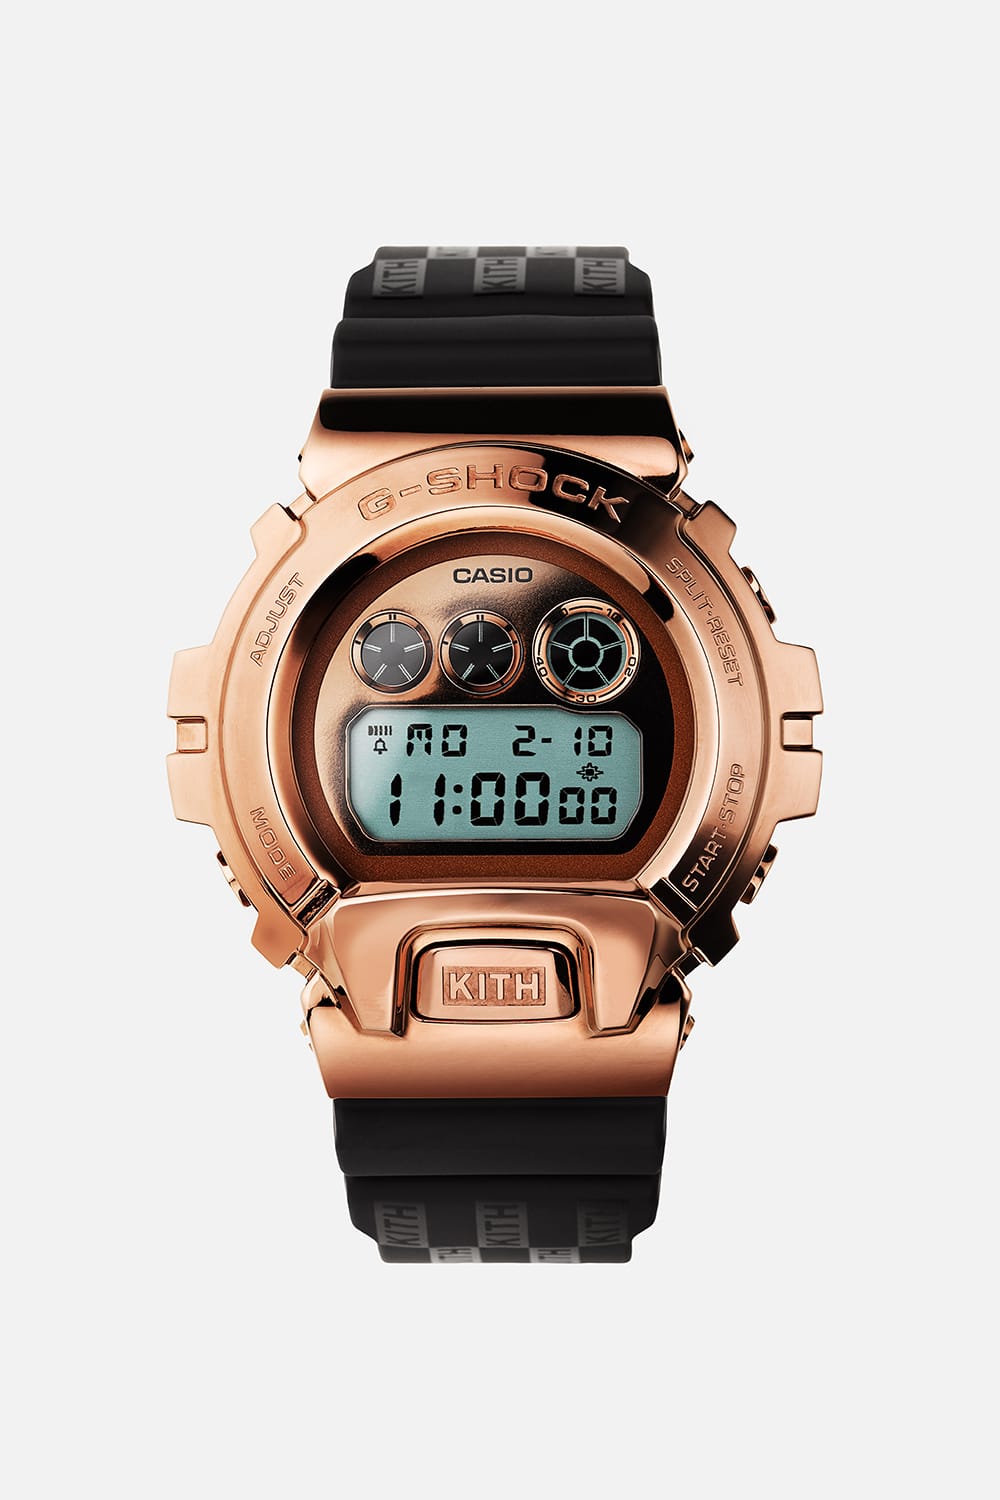 KITH and G-SHOCK Upgrade the GM-6900 